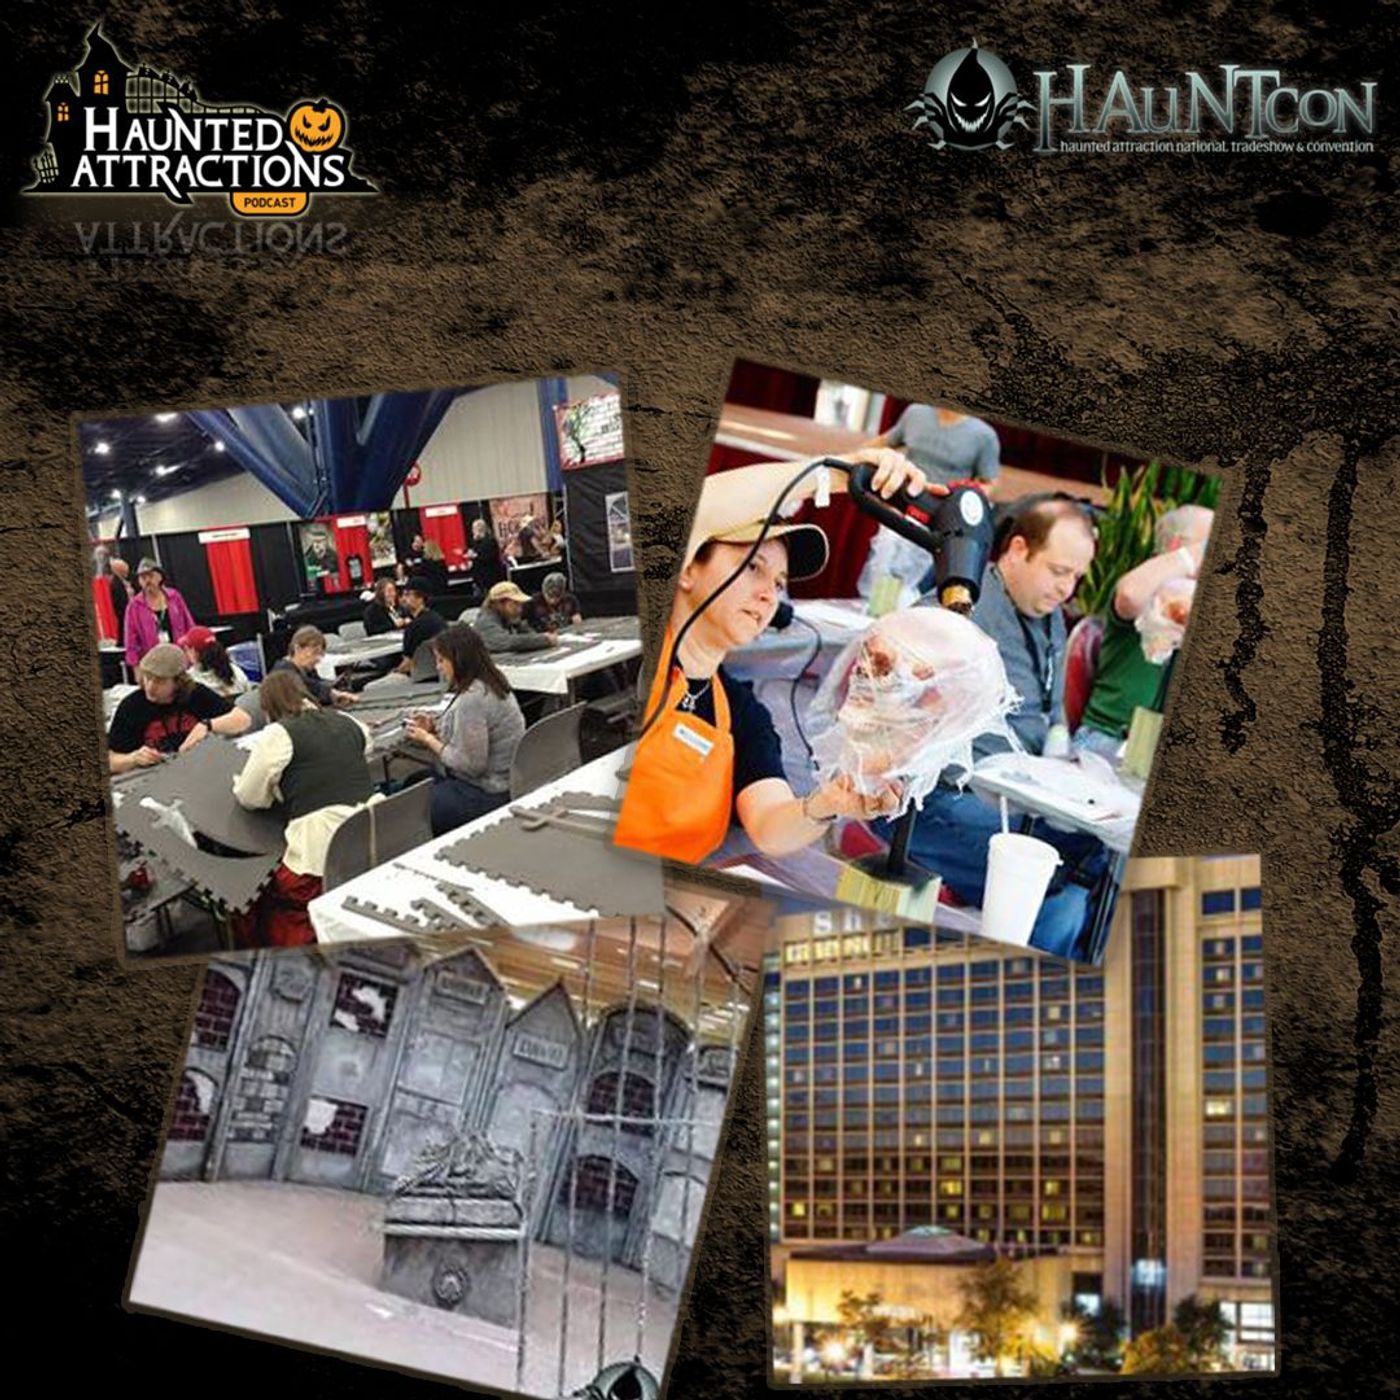 Hot Wire Foam Factory Previews their upcoming HAuNTcon Workshop